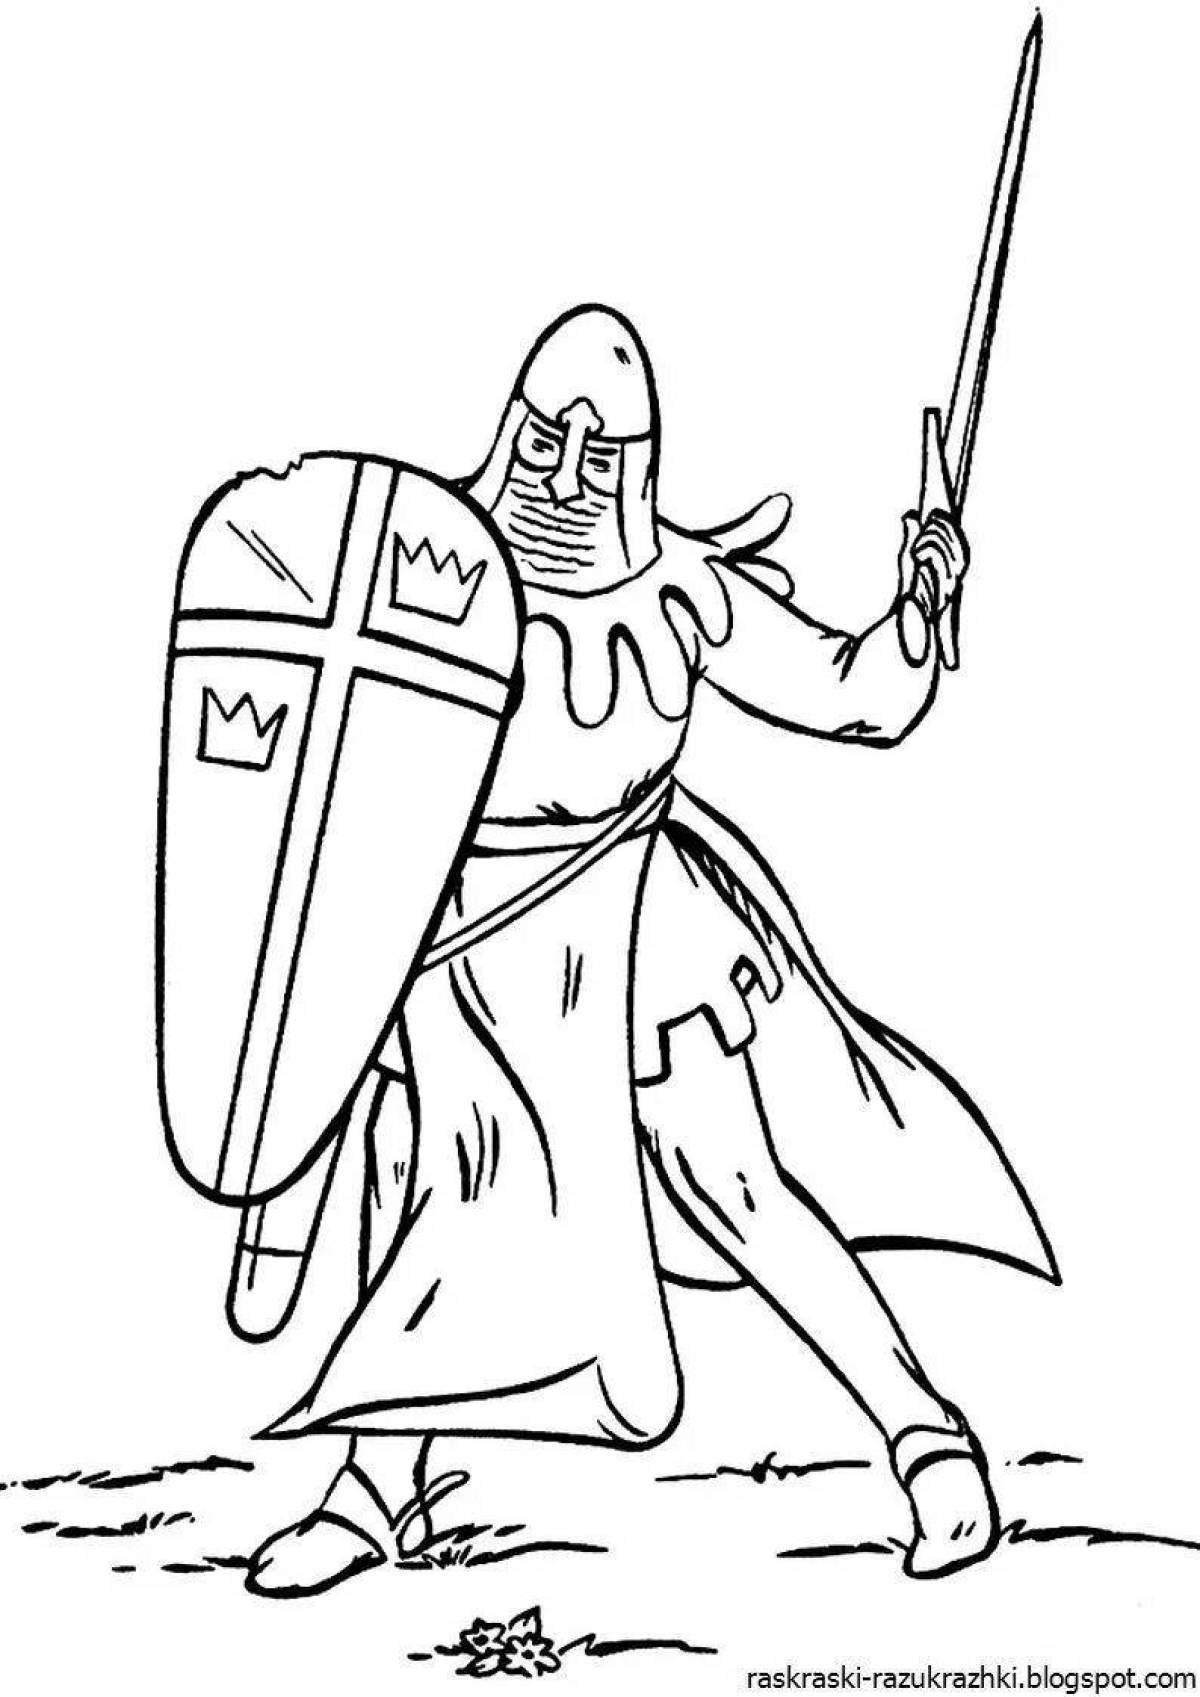 Illustration coloring book knight in armor